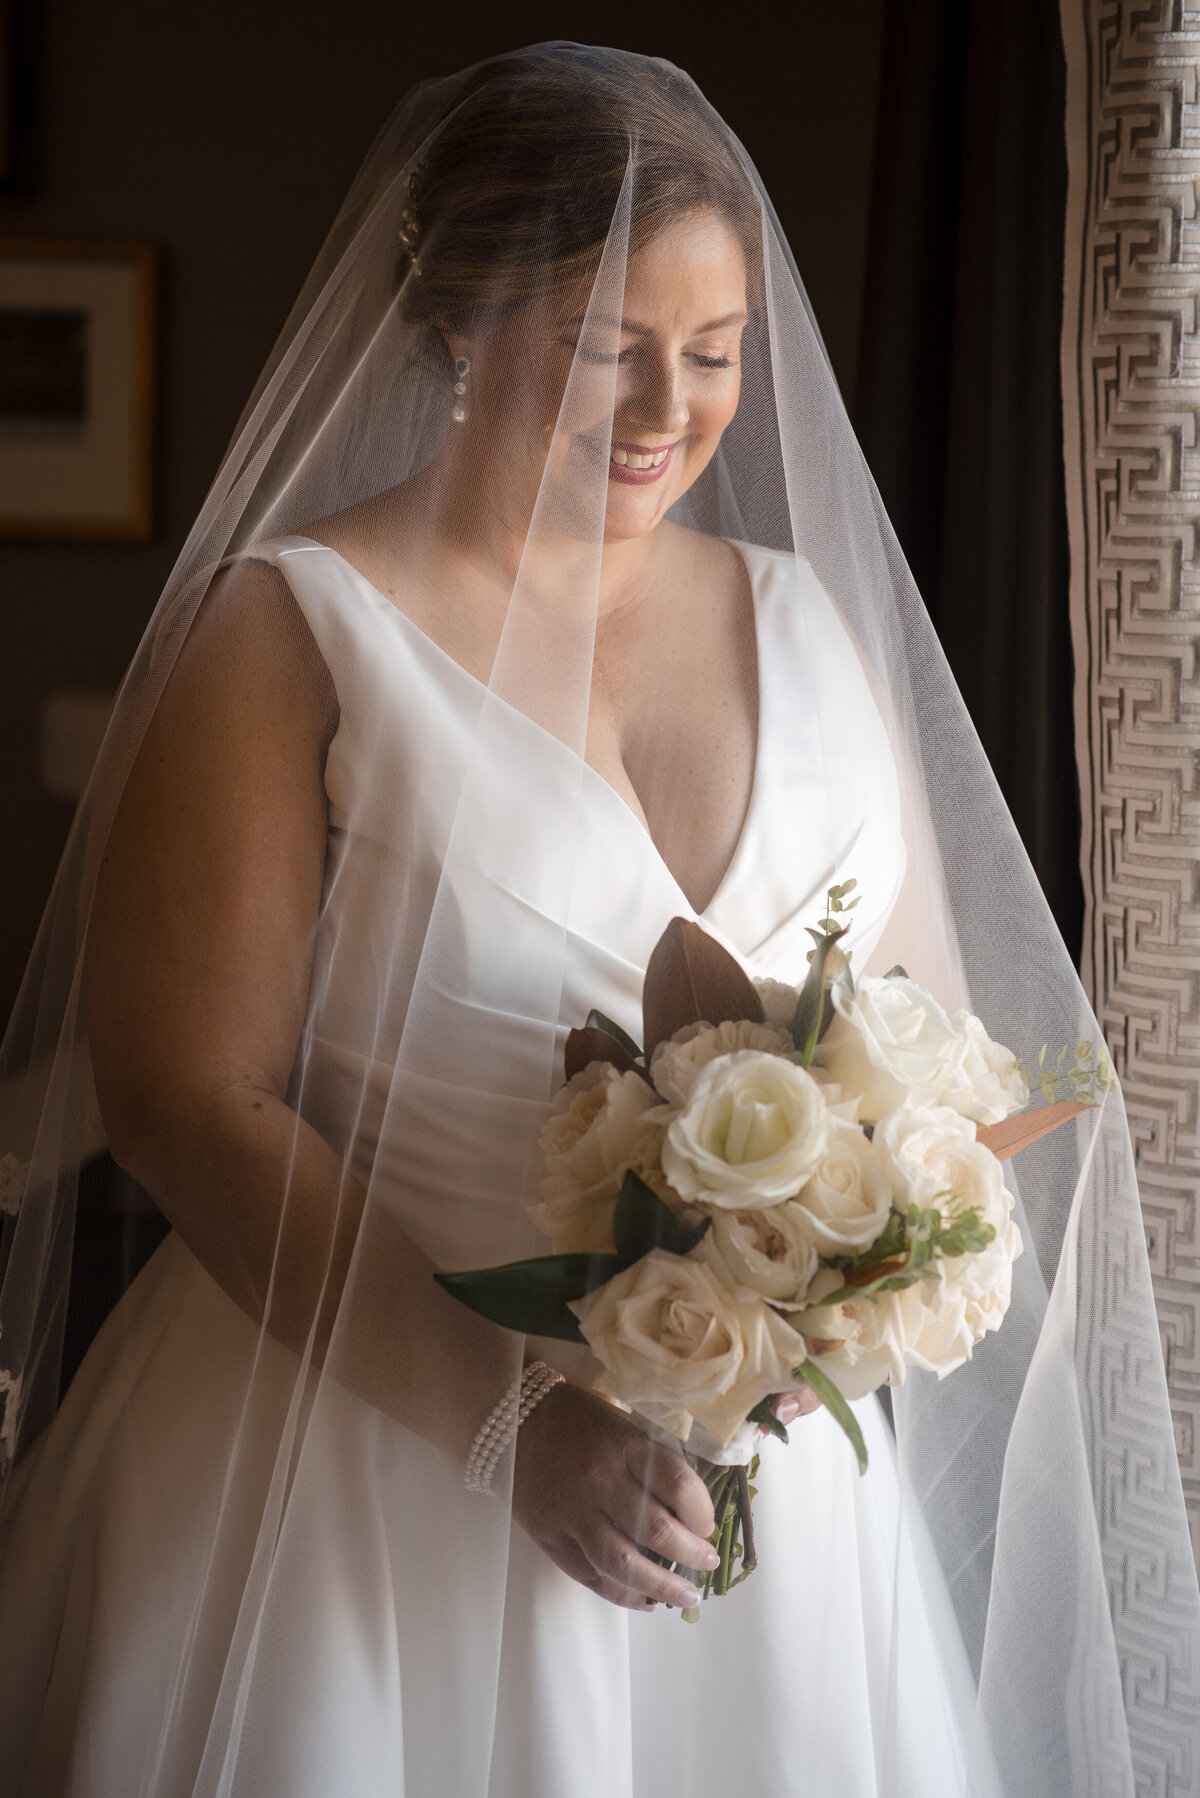 Bridal-portrait-where-the-bride-has-her-veil-over-her-face-and-she's-looking-down-smiling-at-her-flowers-at-the-Ballantyne-Hotel